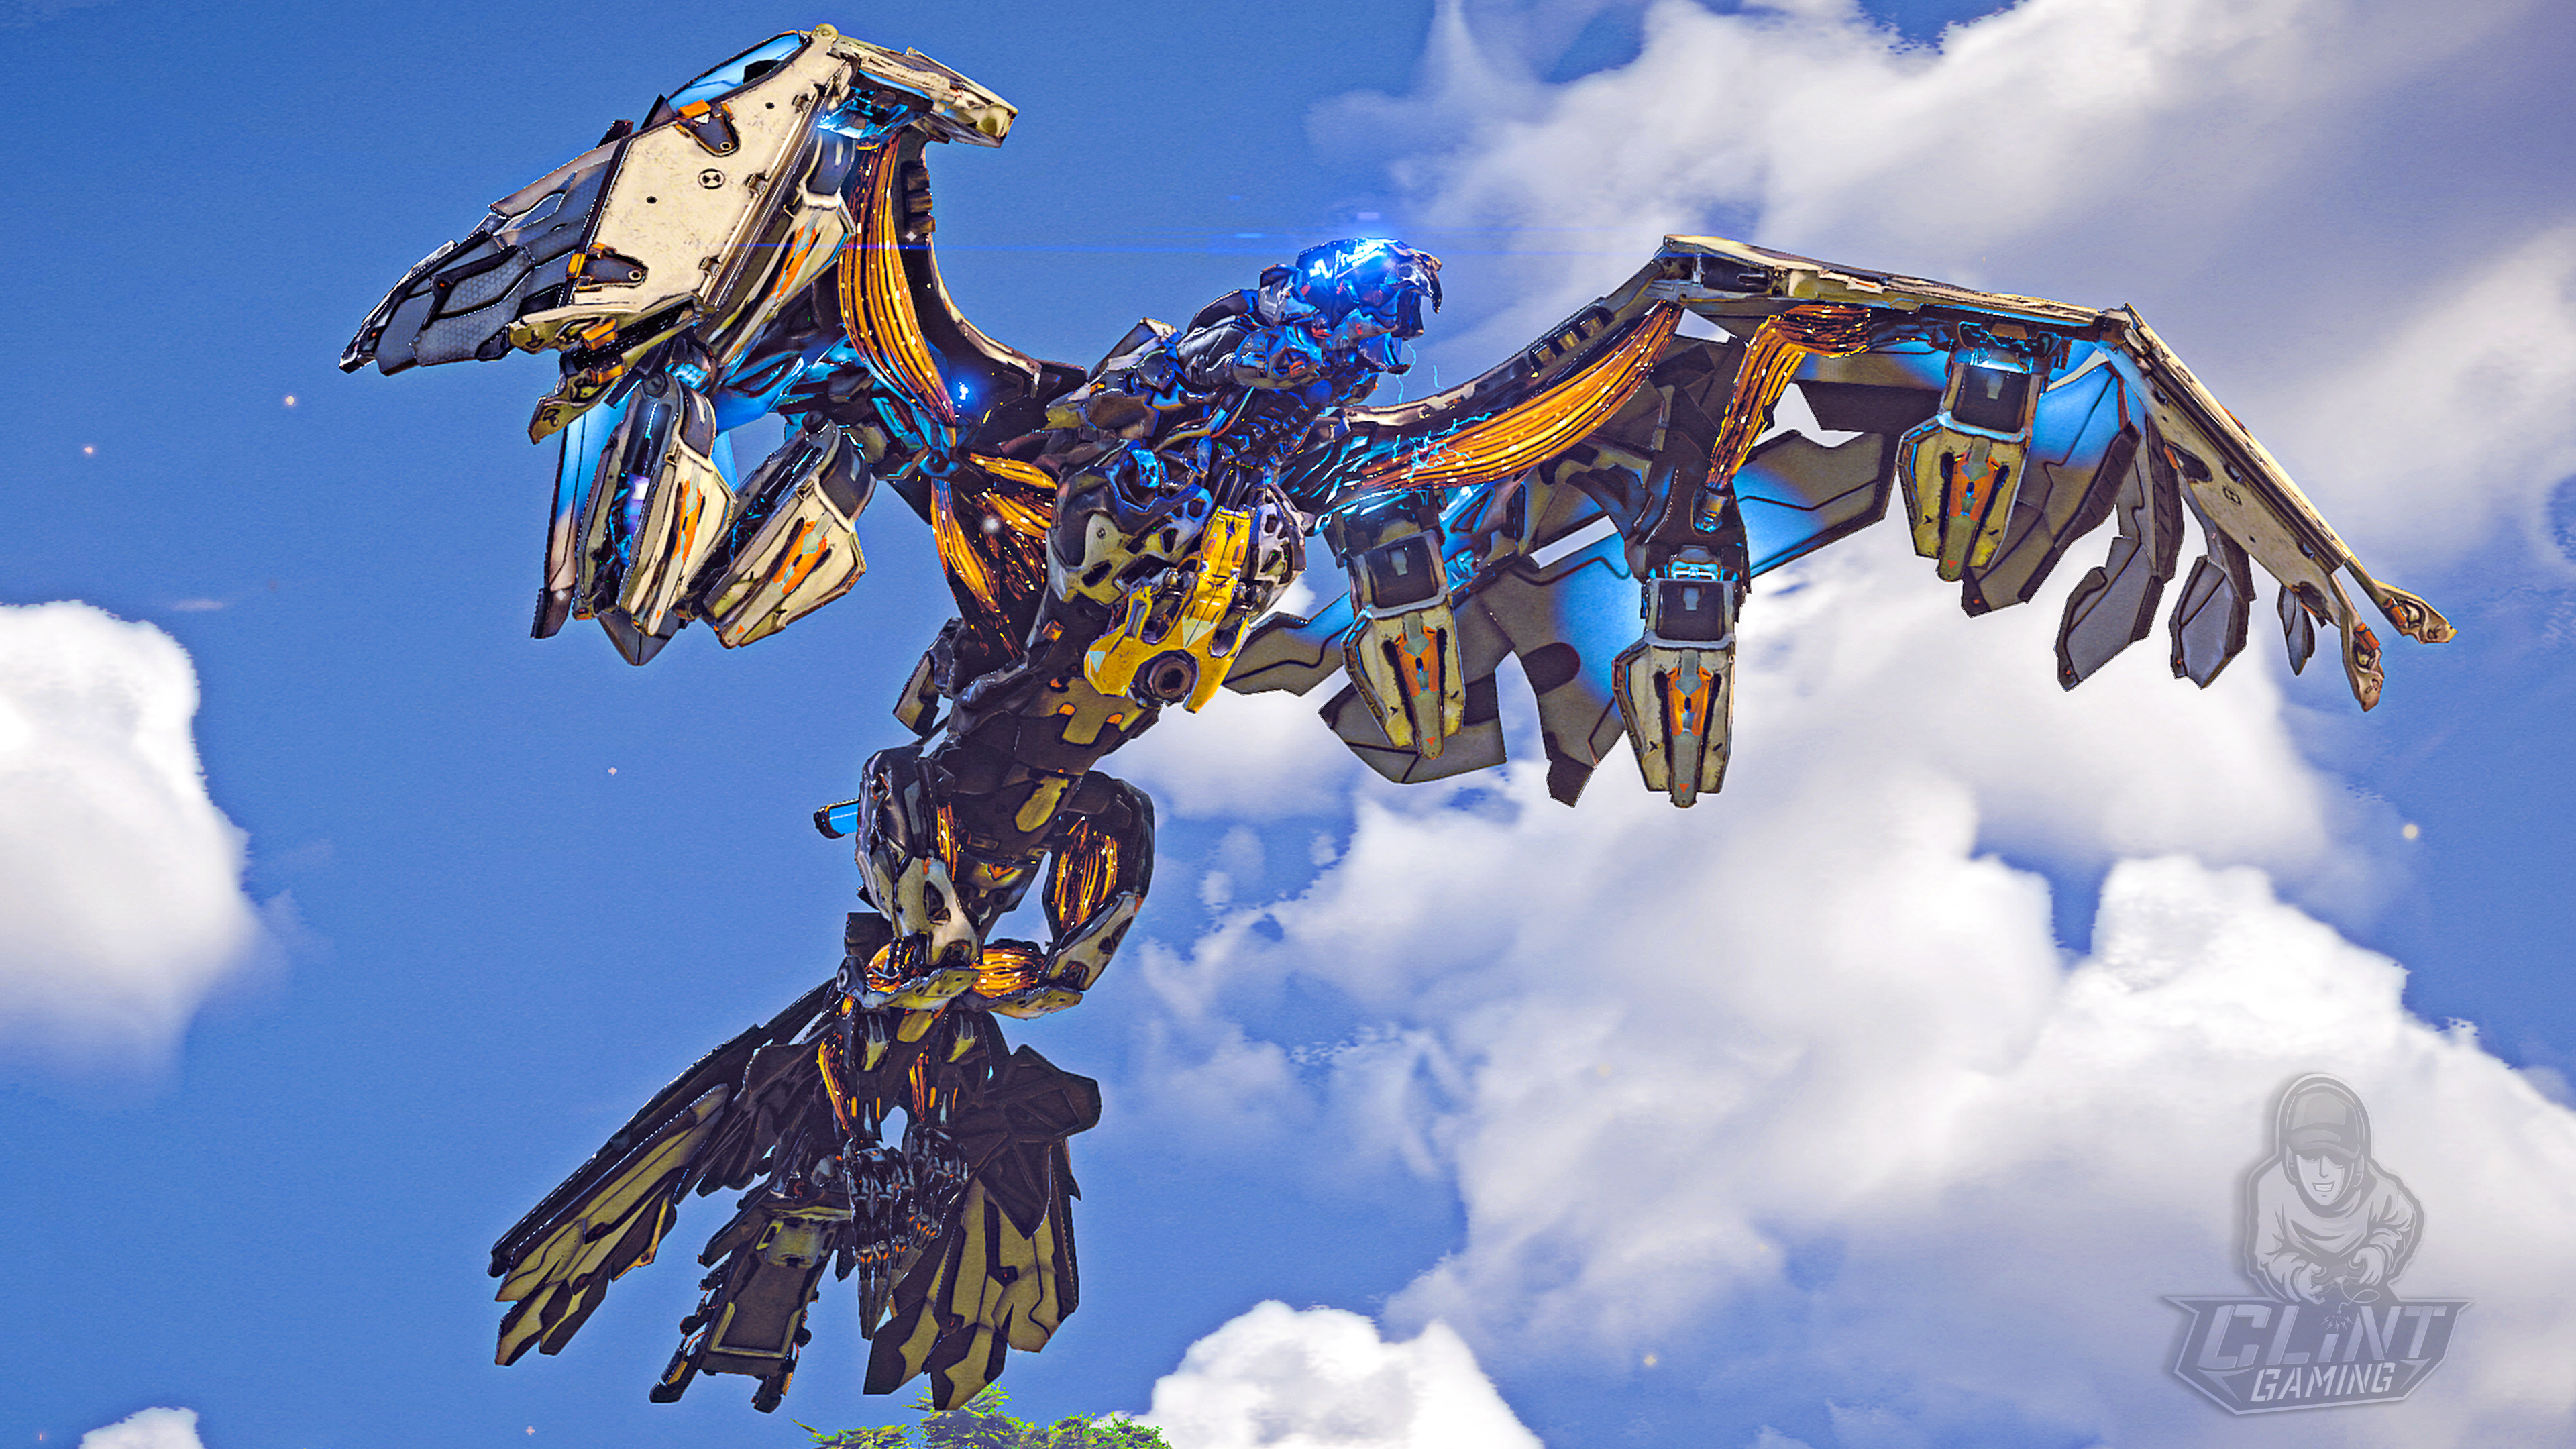 Image of Storm Bird from the game Horizon